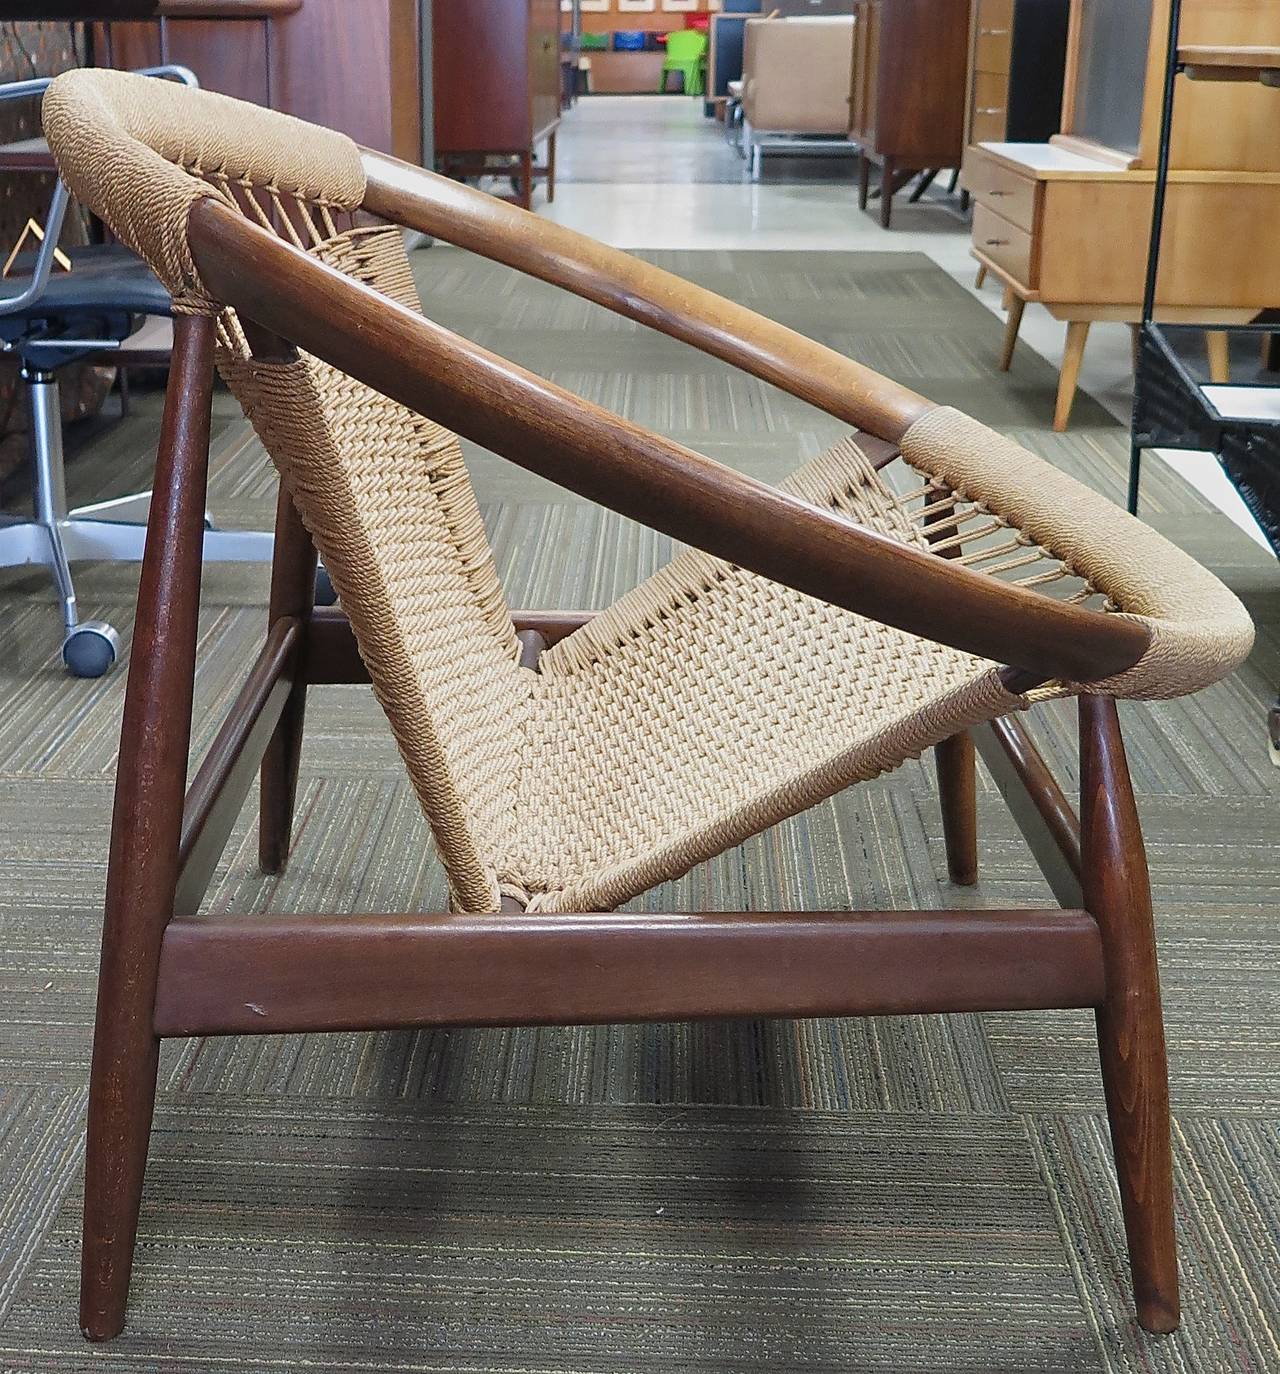 Teak wood construction. Jute seat. Cord is dry, but no breaks. Wood has normal wear from use. Arm rest area is slightly lighter than the rest of the chair with some mild finish wear along the legs. Overall this is a great comfortable chair with